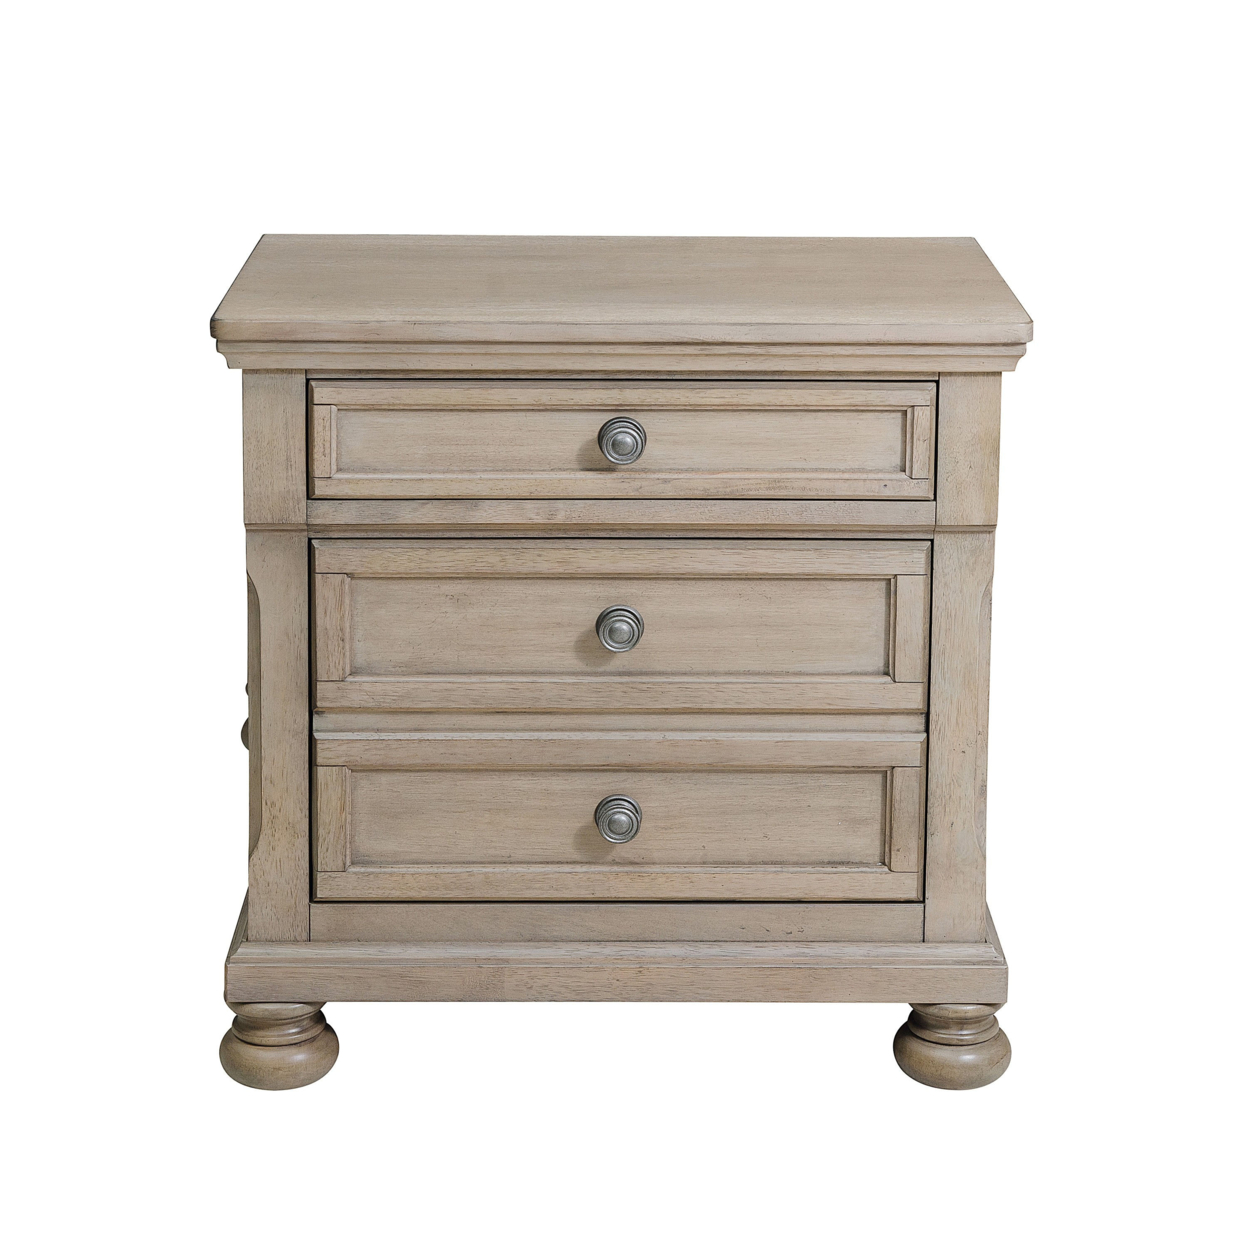 Two Drawers Wooden Nightstand With Hidden Drawer And Pull Out Metal Knob, Gray- Saltoro Sherpi